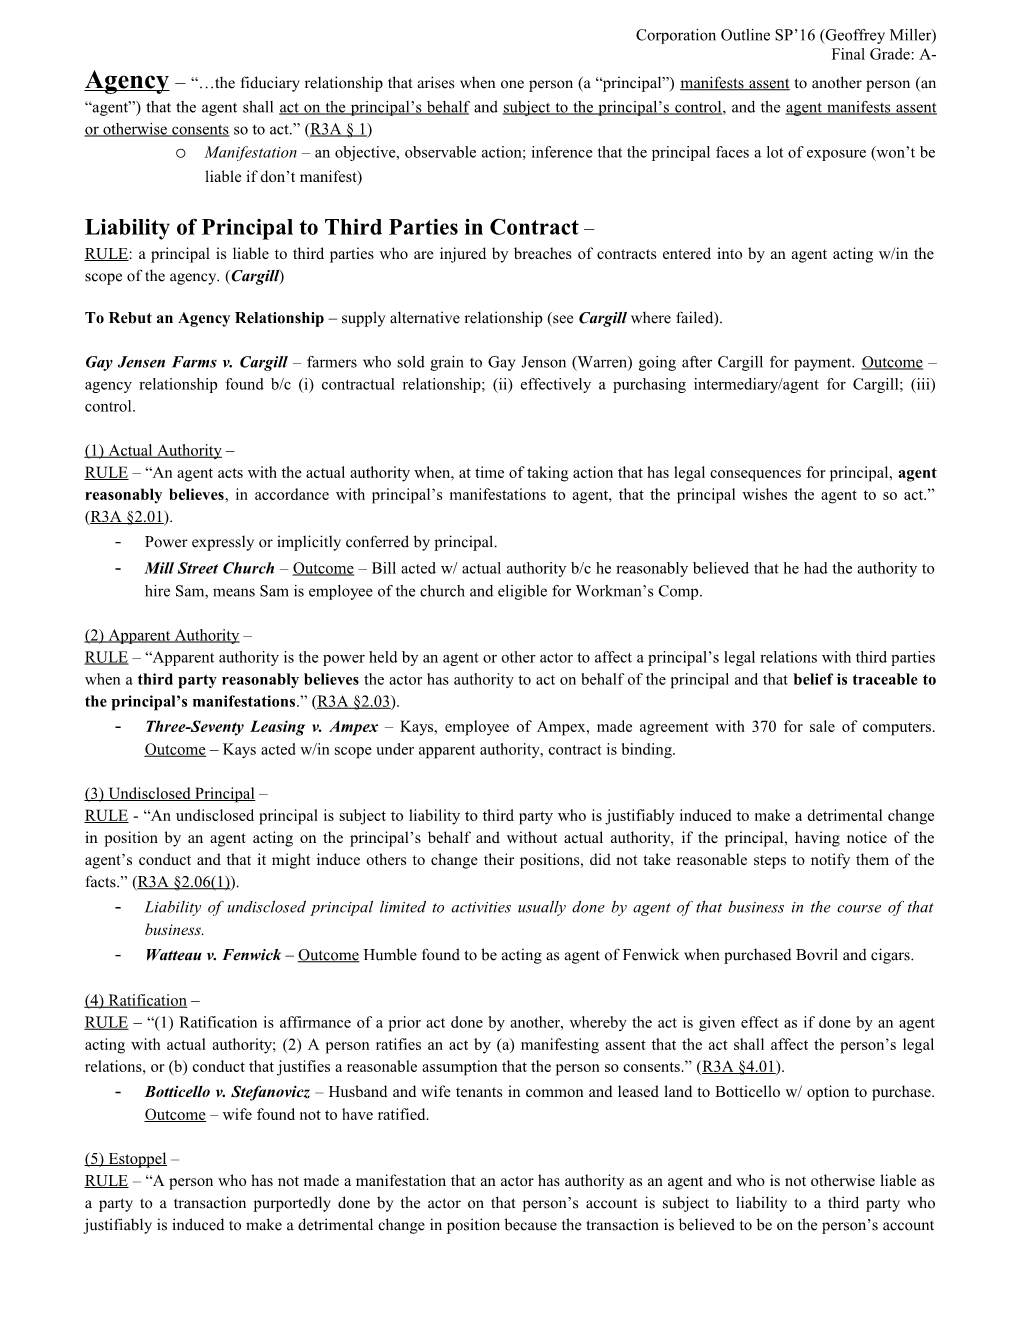 Liability of Principal to Third Parties in Contract